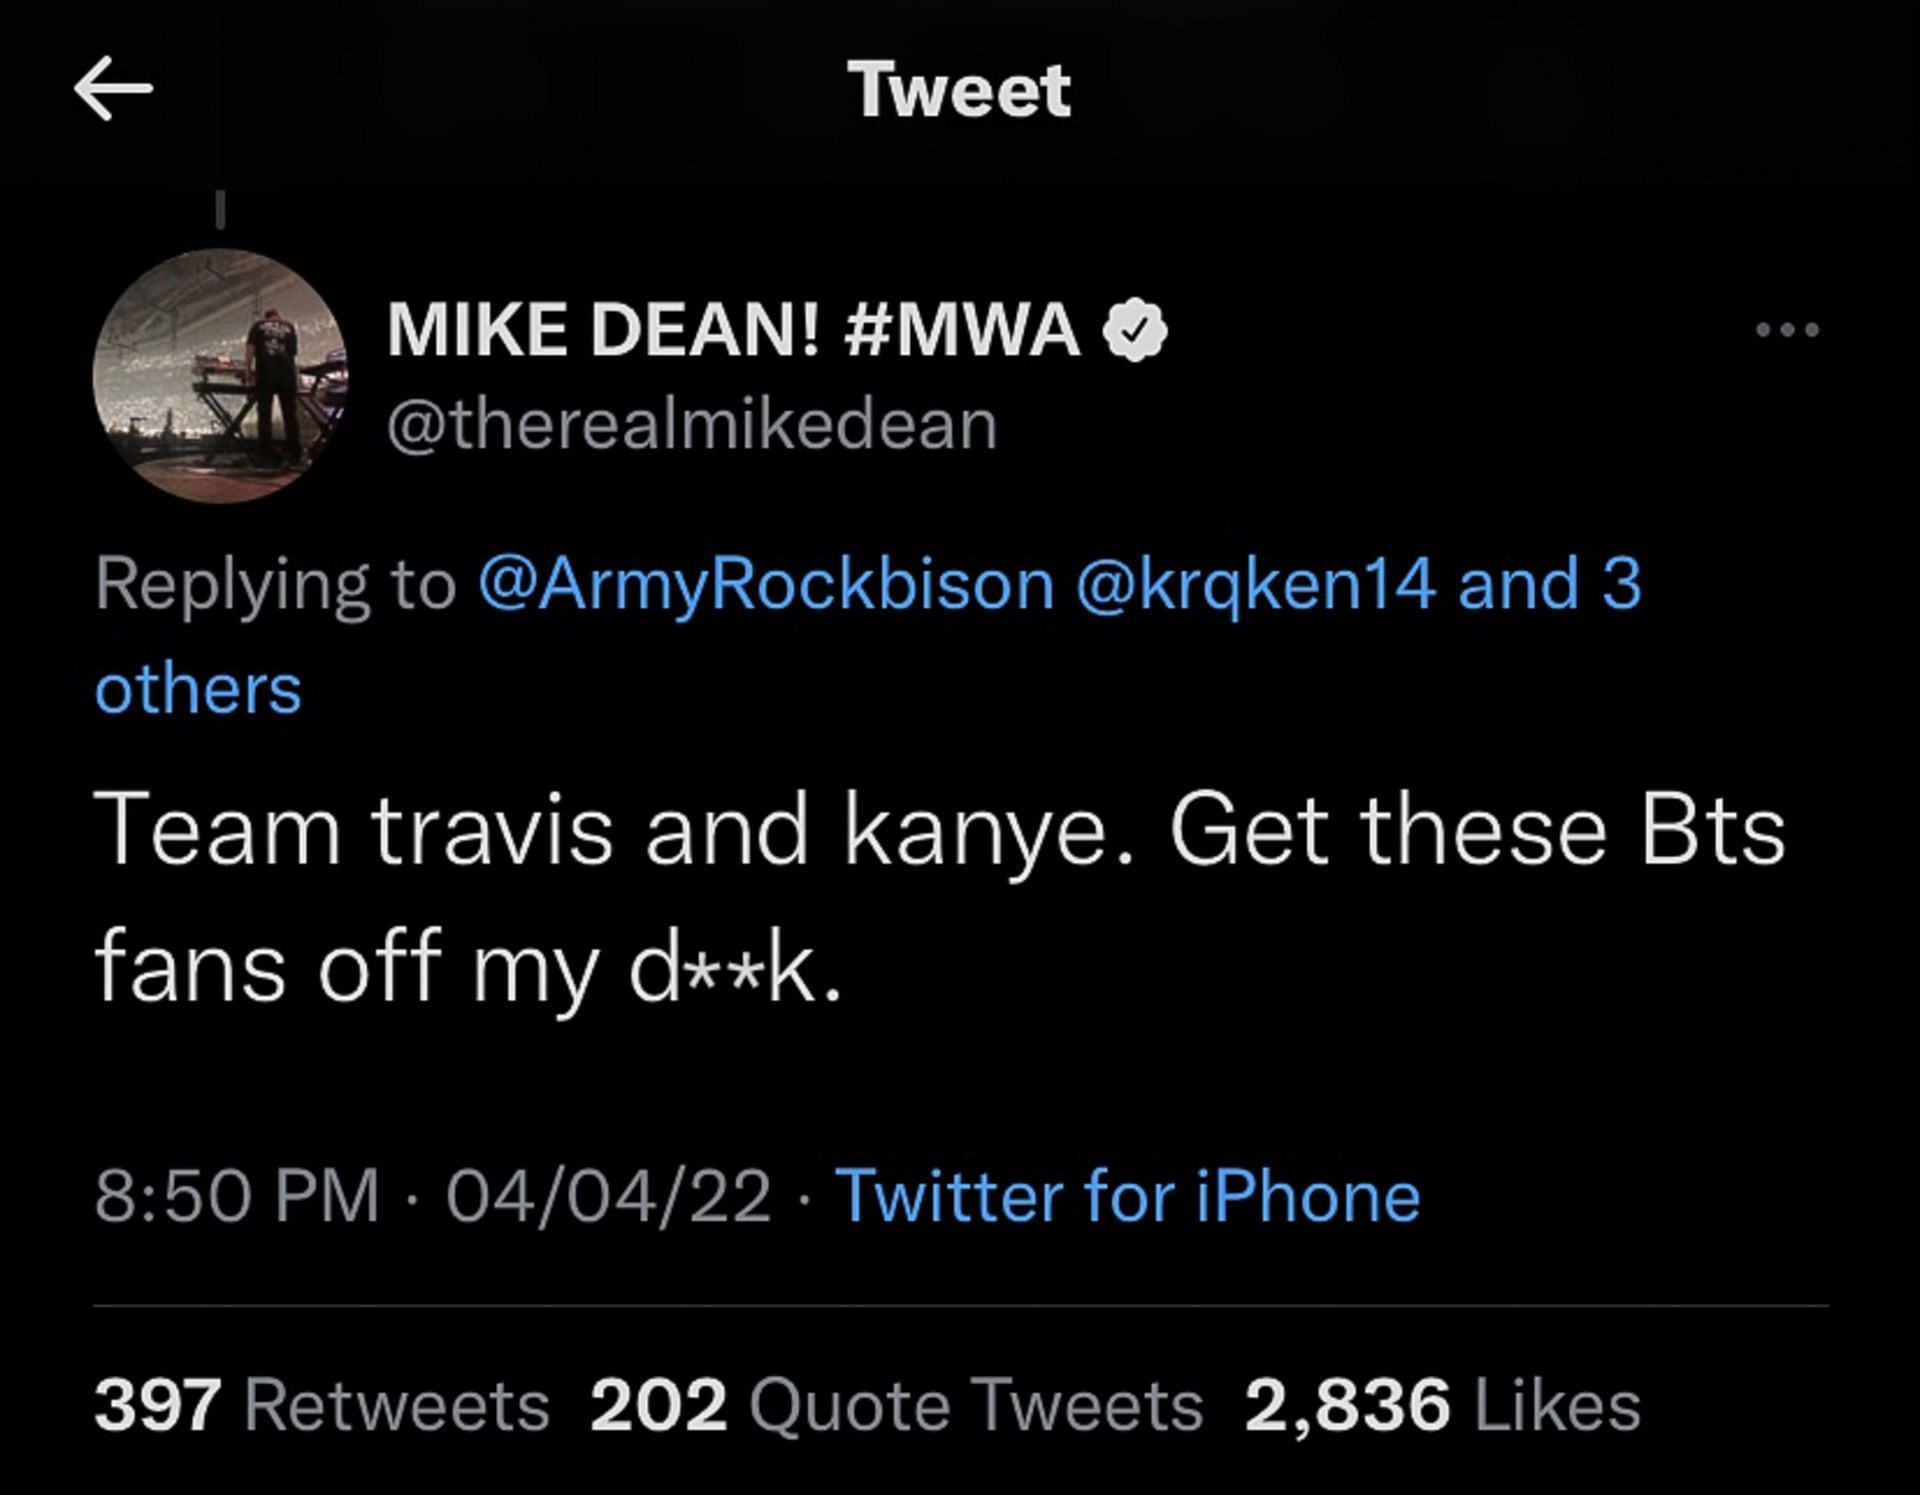 Mike hurls ill-suited comments at BTS fans (Image via @therealmike dean/Twitter)